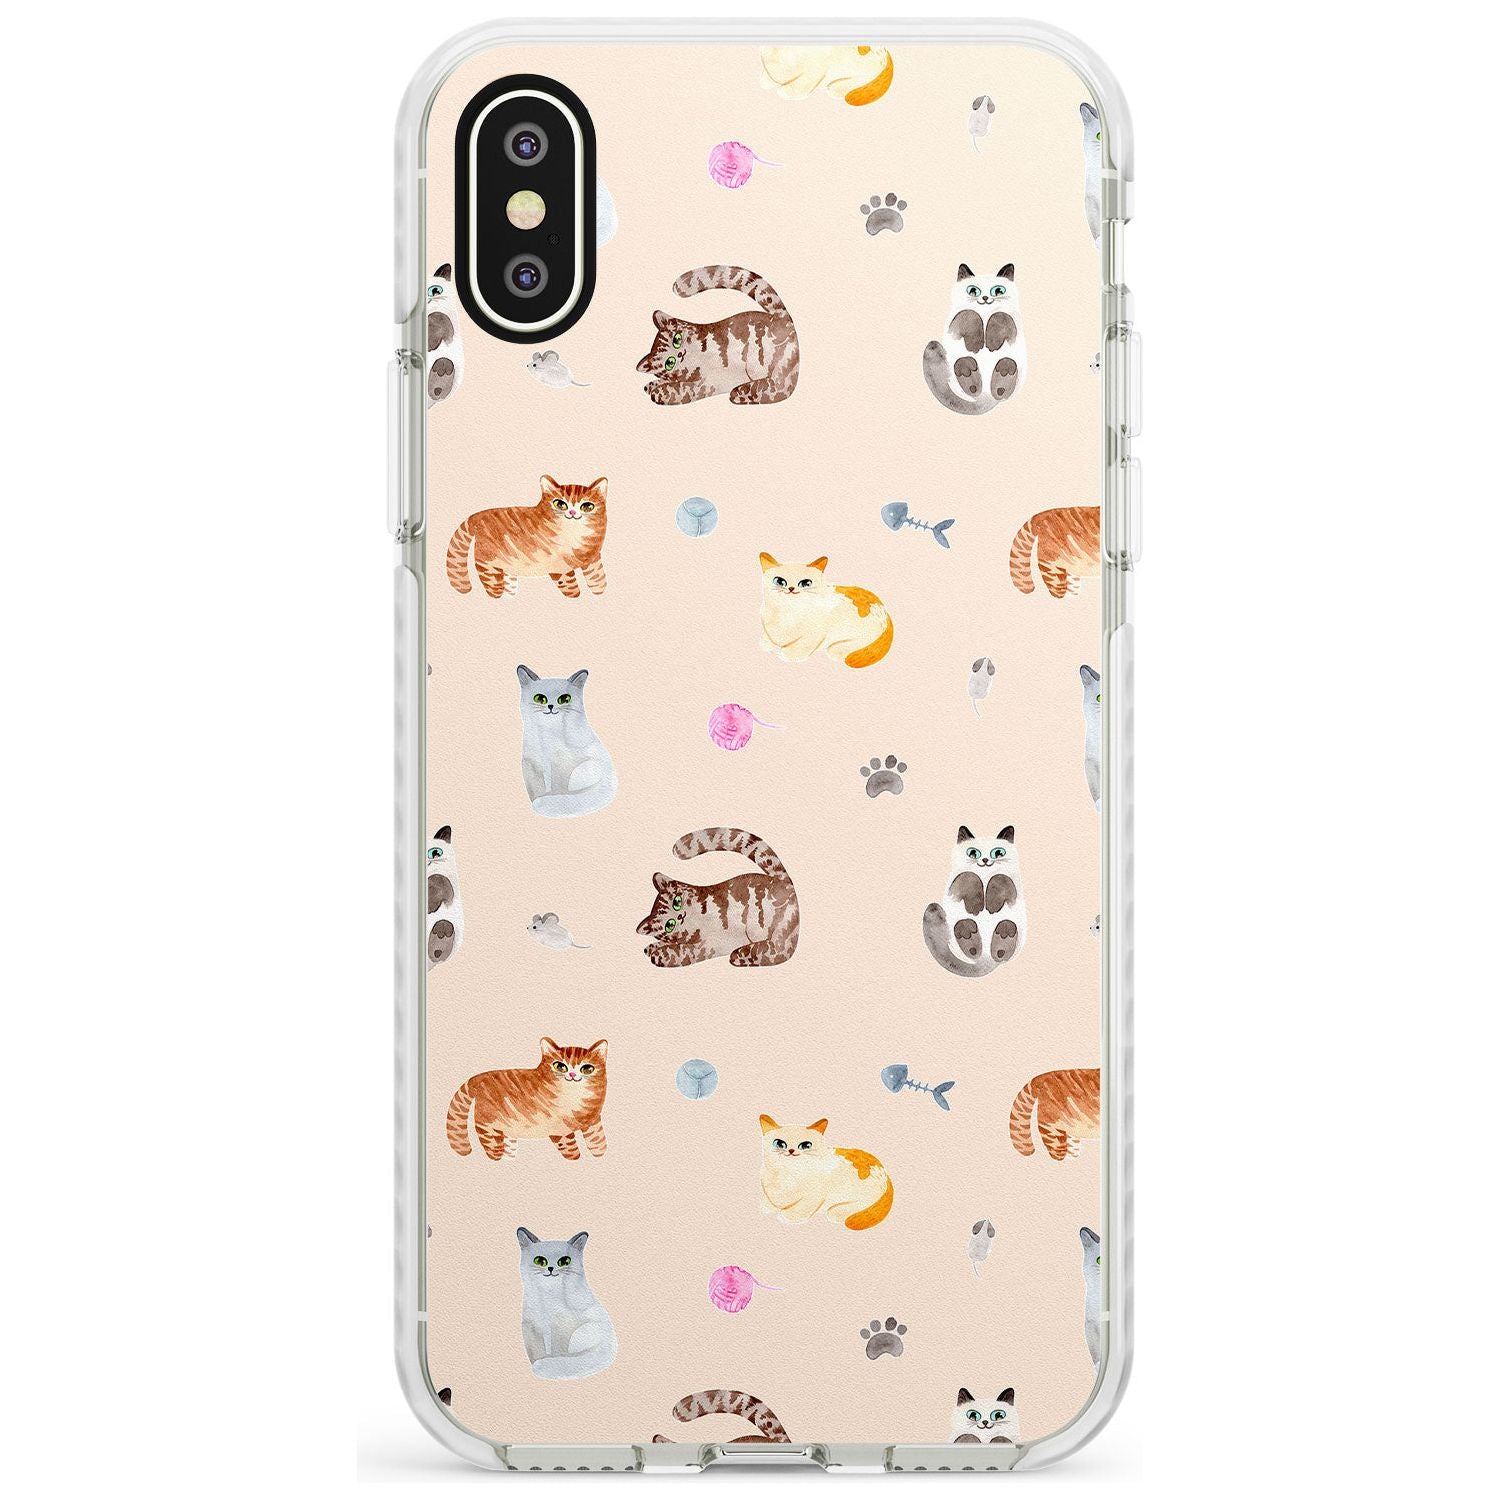 Cats with Toys Slim TPU Phone Case Warehouse X XS Max XR